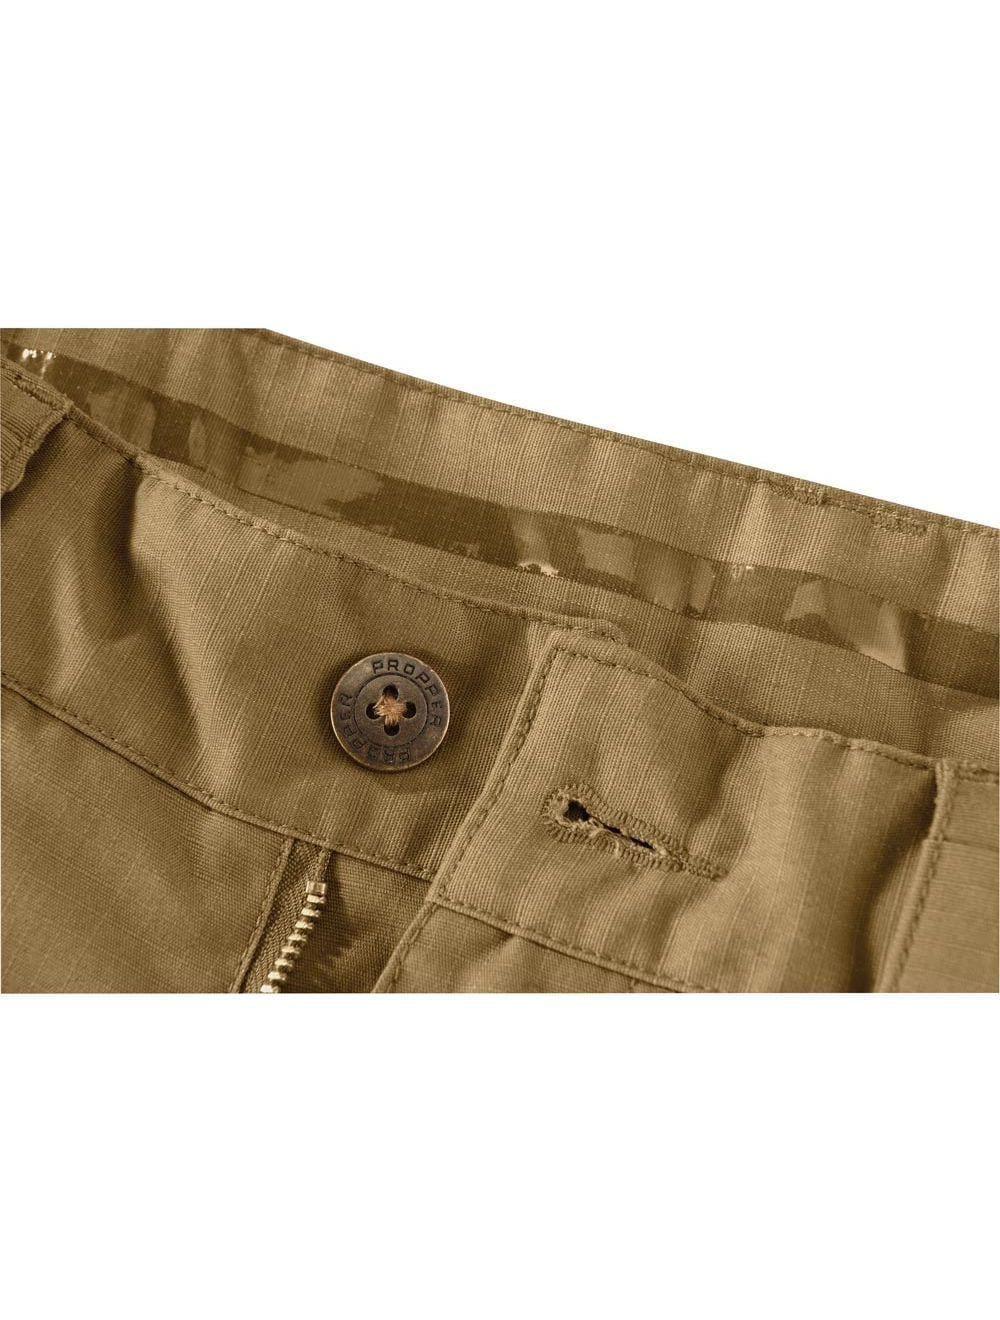 Waterproof Tactical Pants for Men Heavy Duty 12 pockets, Men's Fashion,  Bottoms, Trousers on Carousell